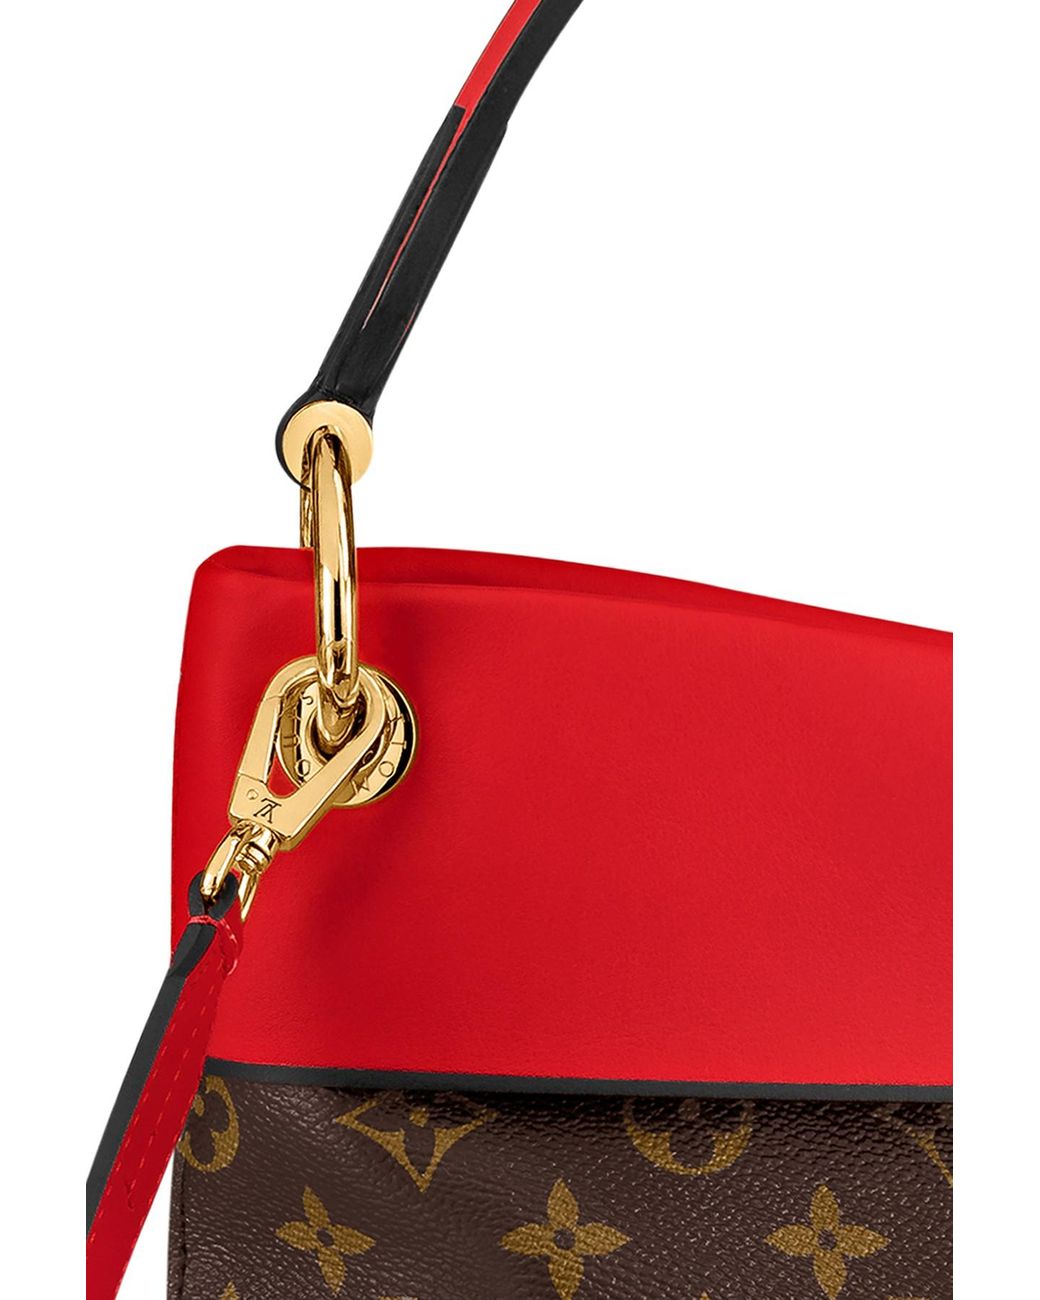 louis vuitton bag with red accents